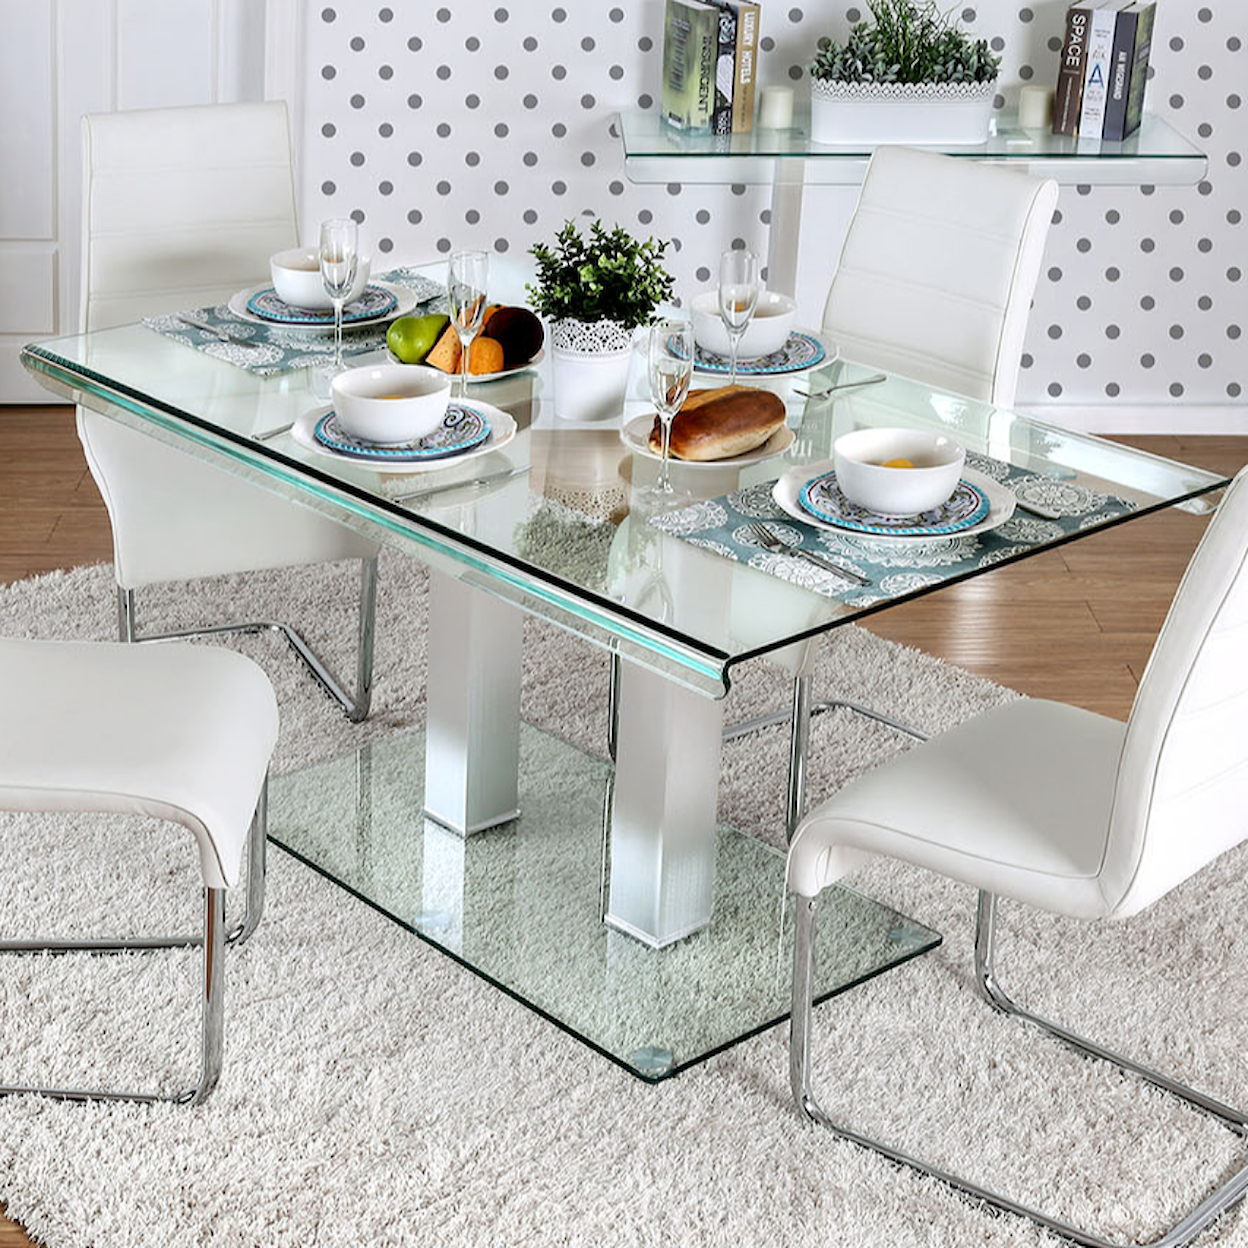 Furniture of America - FOA Richfield Dining Table